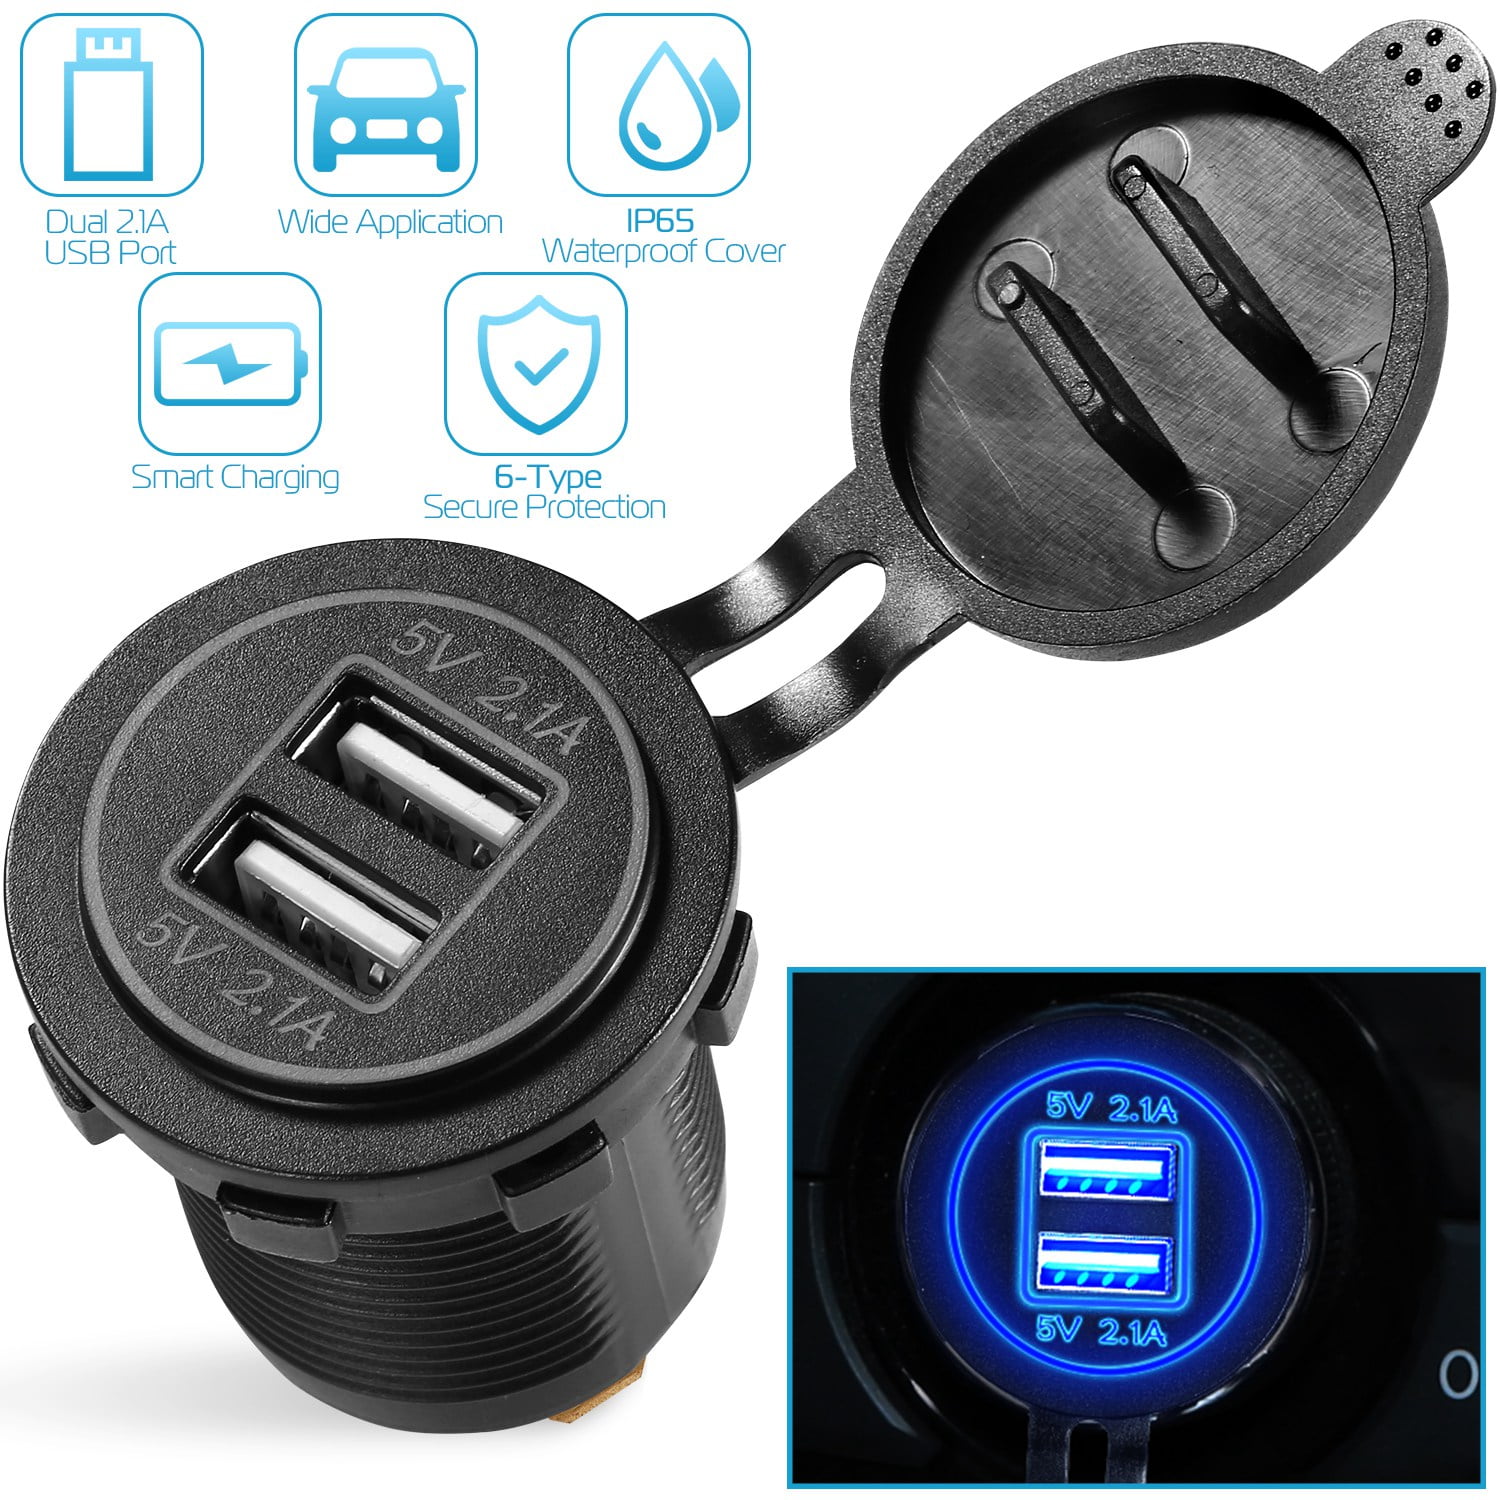 Buy Led round backlight car charger 2 Port USB 5V 2.1A/1A Waterproof in   store just for 14.90€